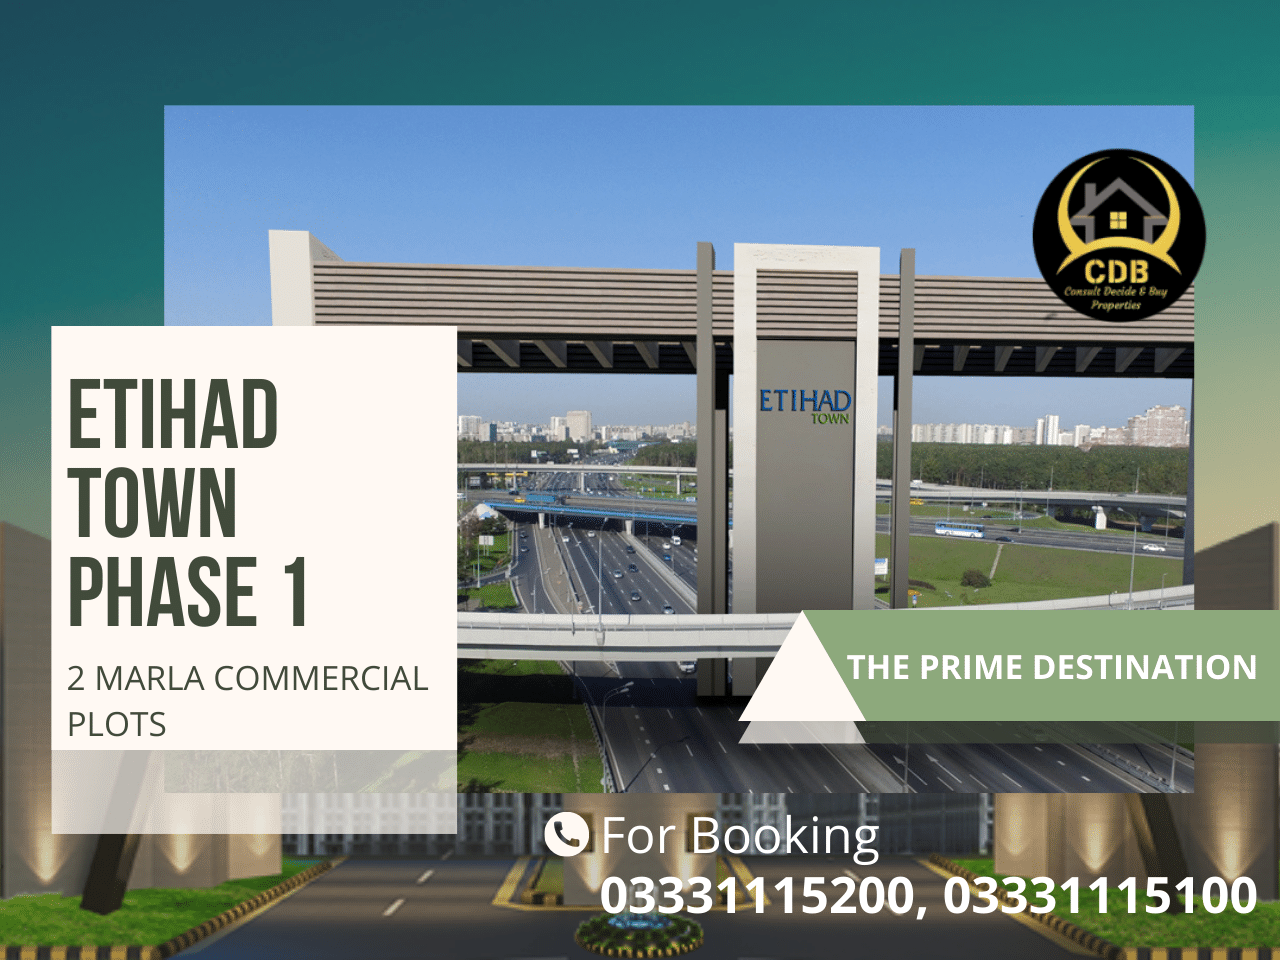 Etihad Town Phase 1 2 Marla Commercial Plots